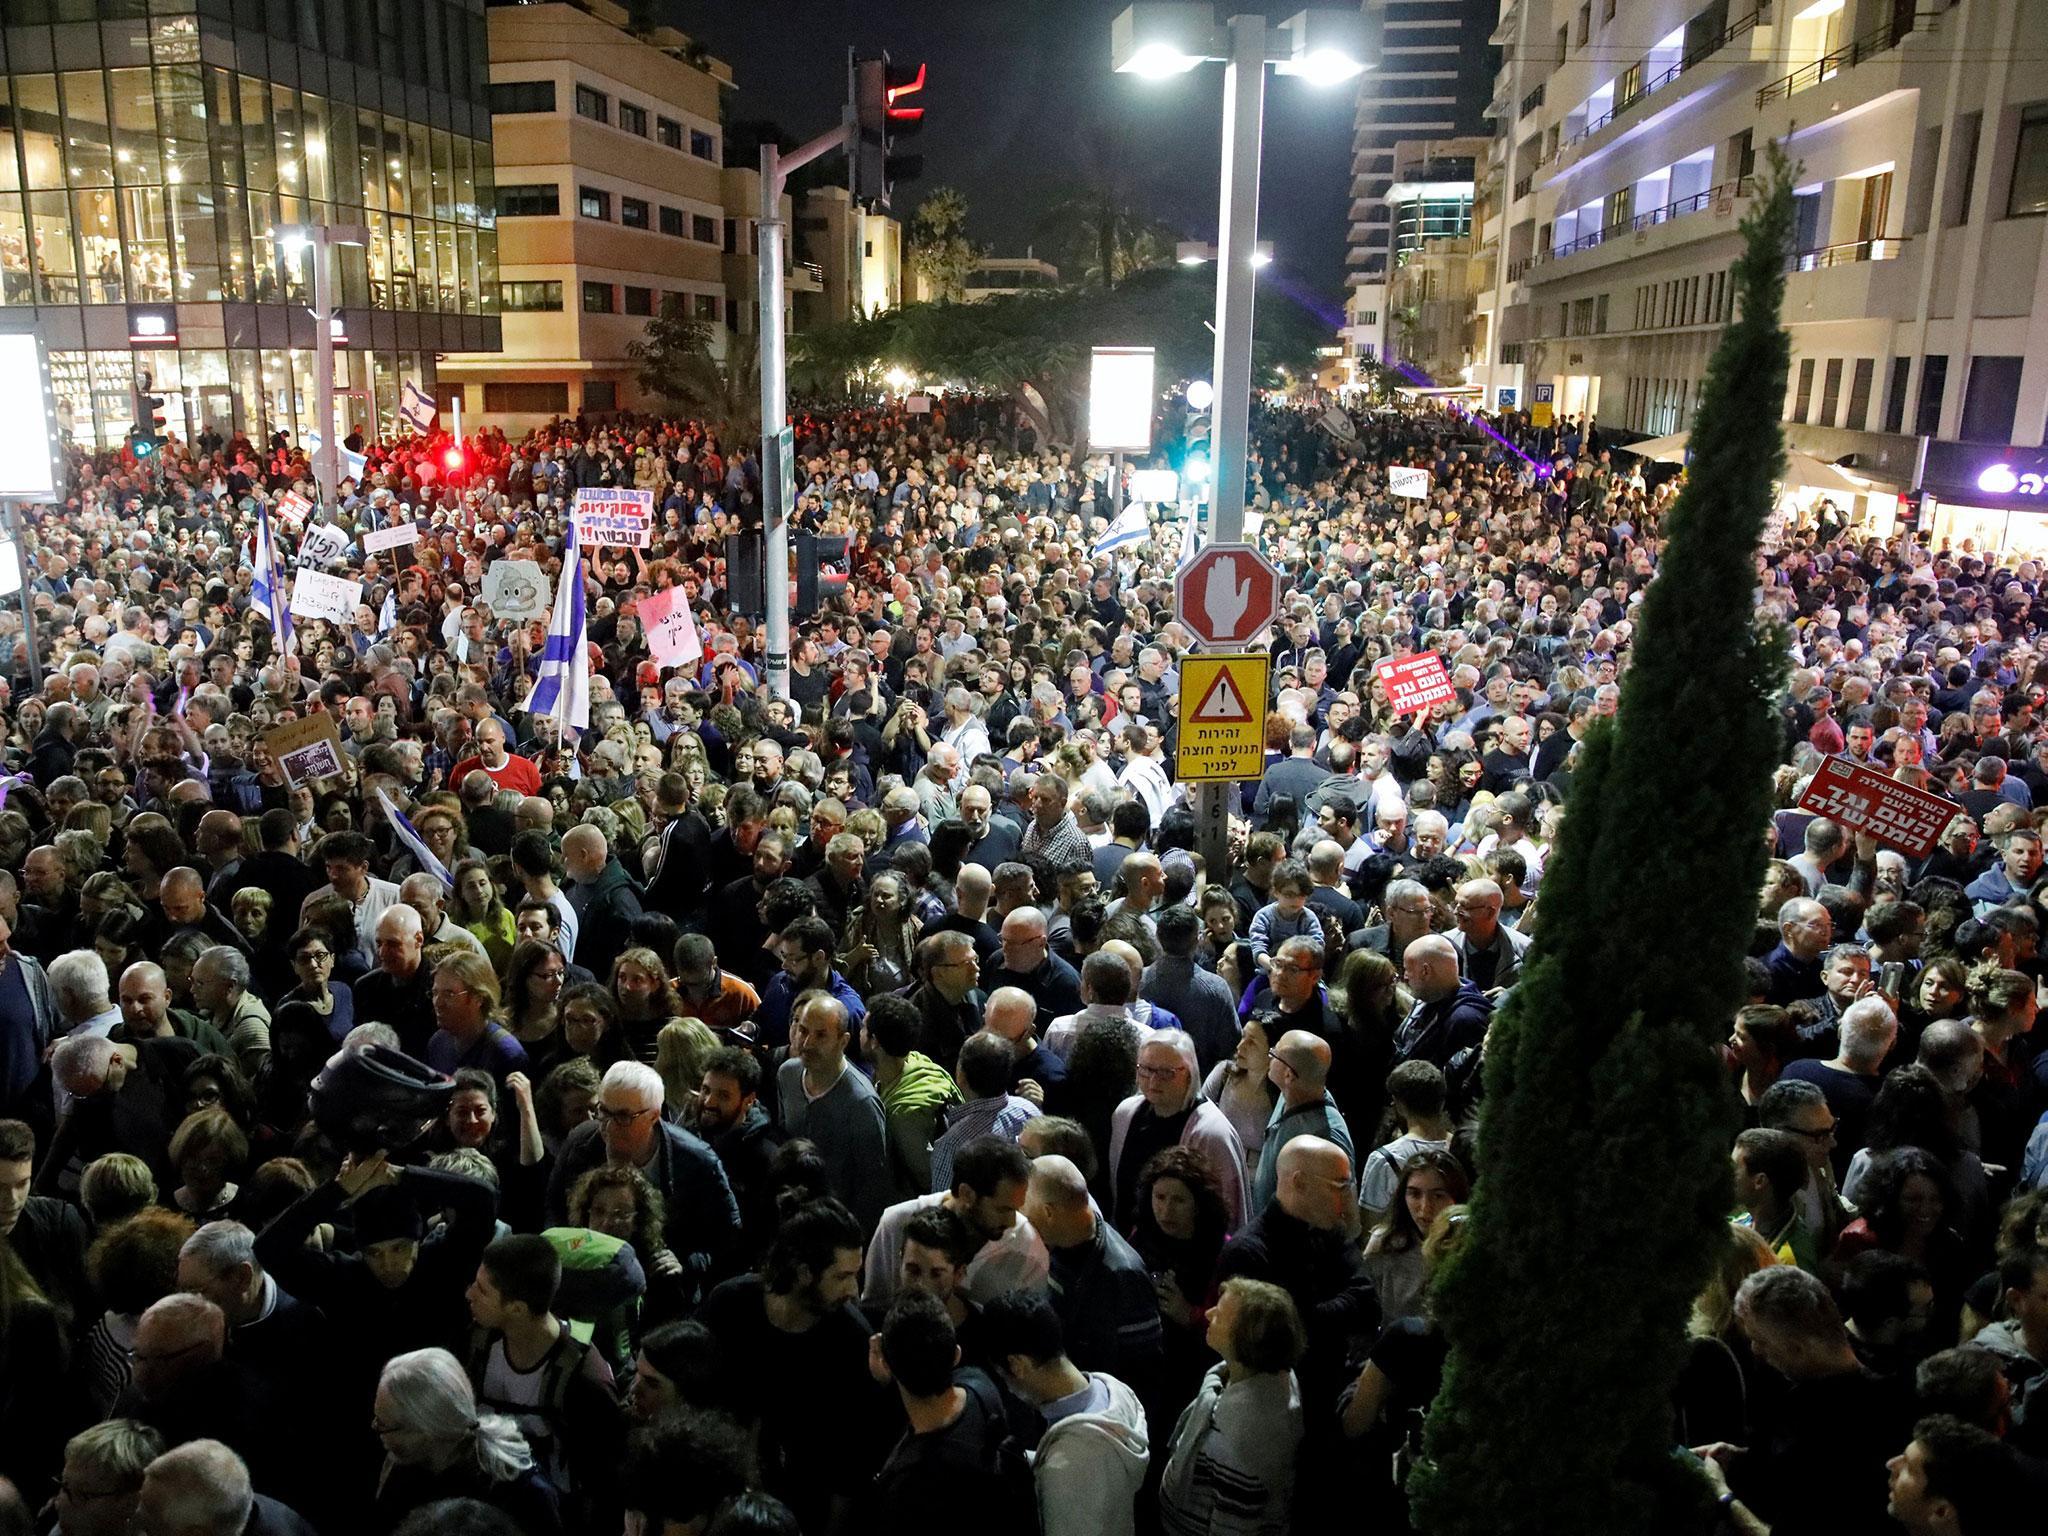 Tens of thousands of Israelis poured into the streets of Tel Aviv for an anti-corruption rally calling on Benjamin Netanyahu to resign